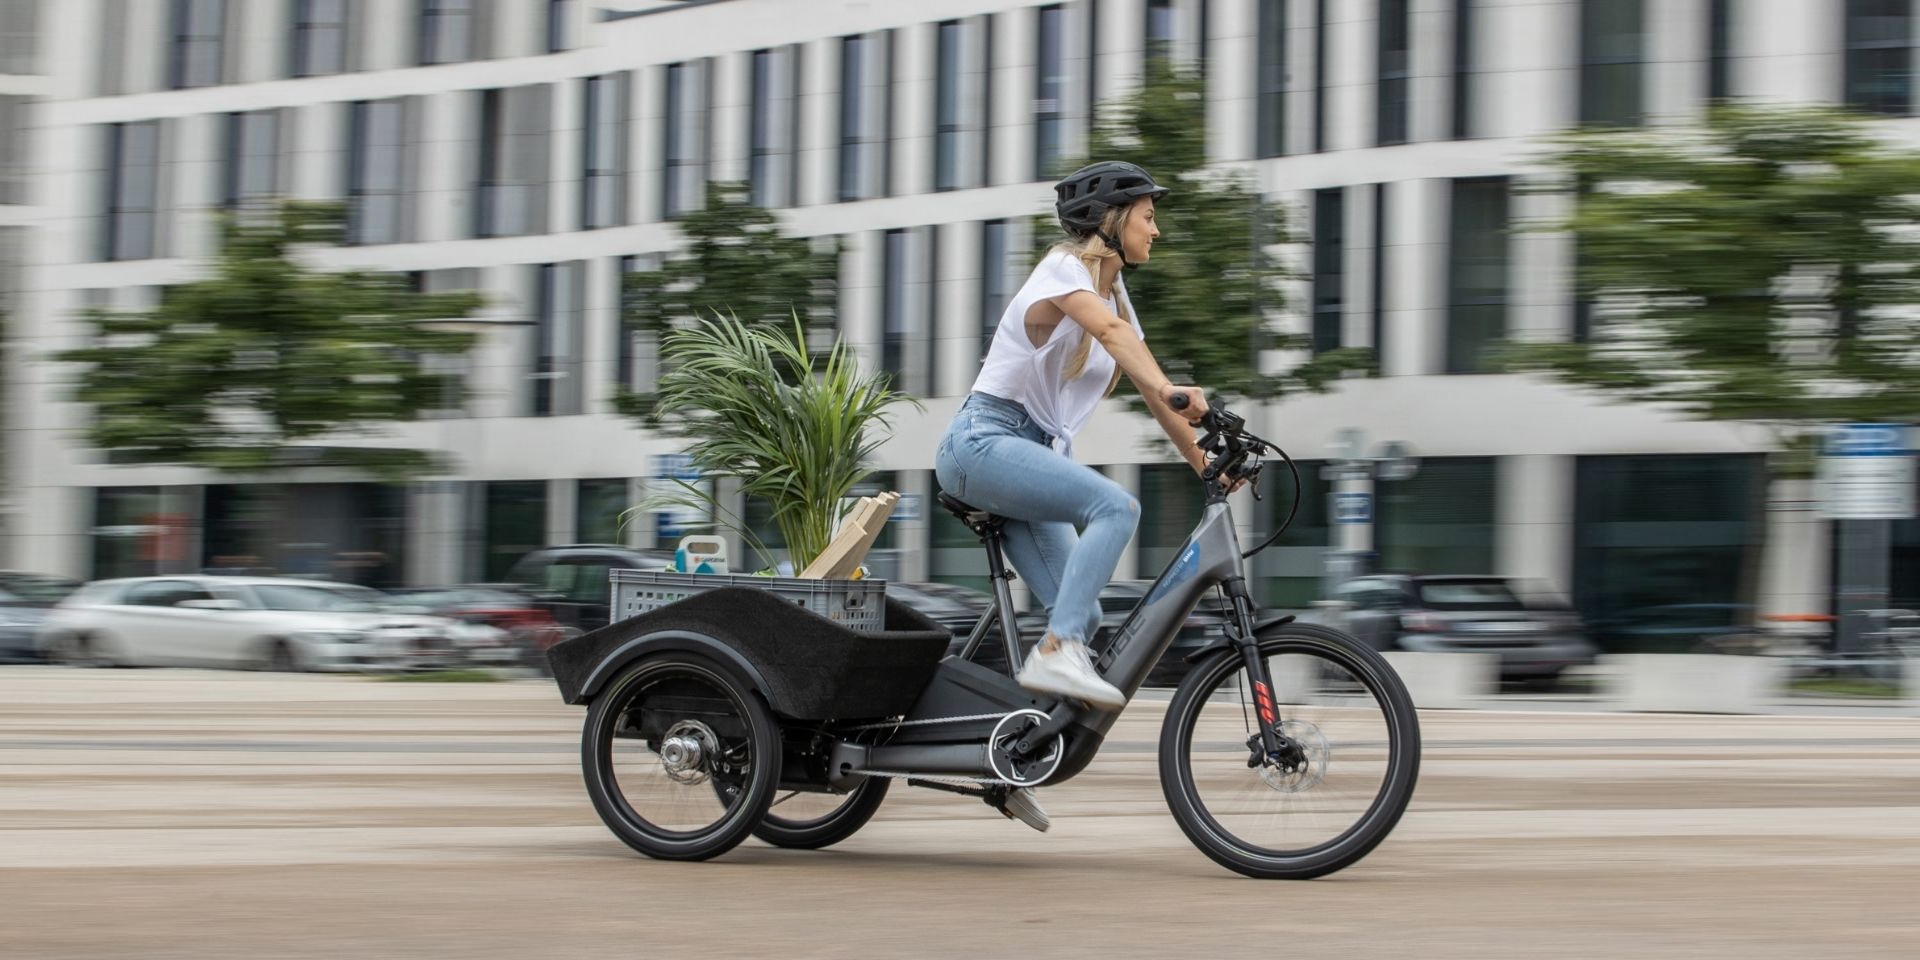 BMWs tilting electric cargo bike appears to be headed for production